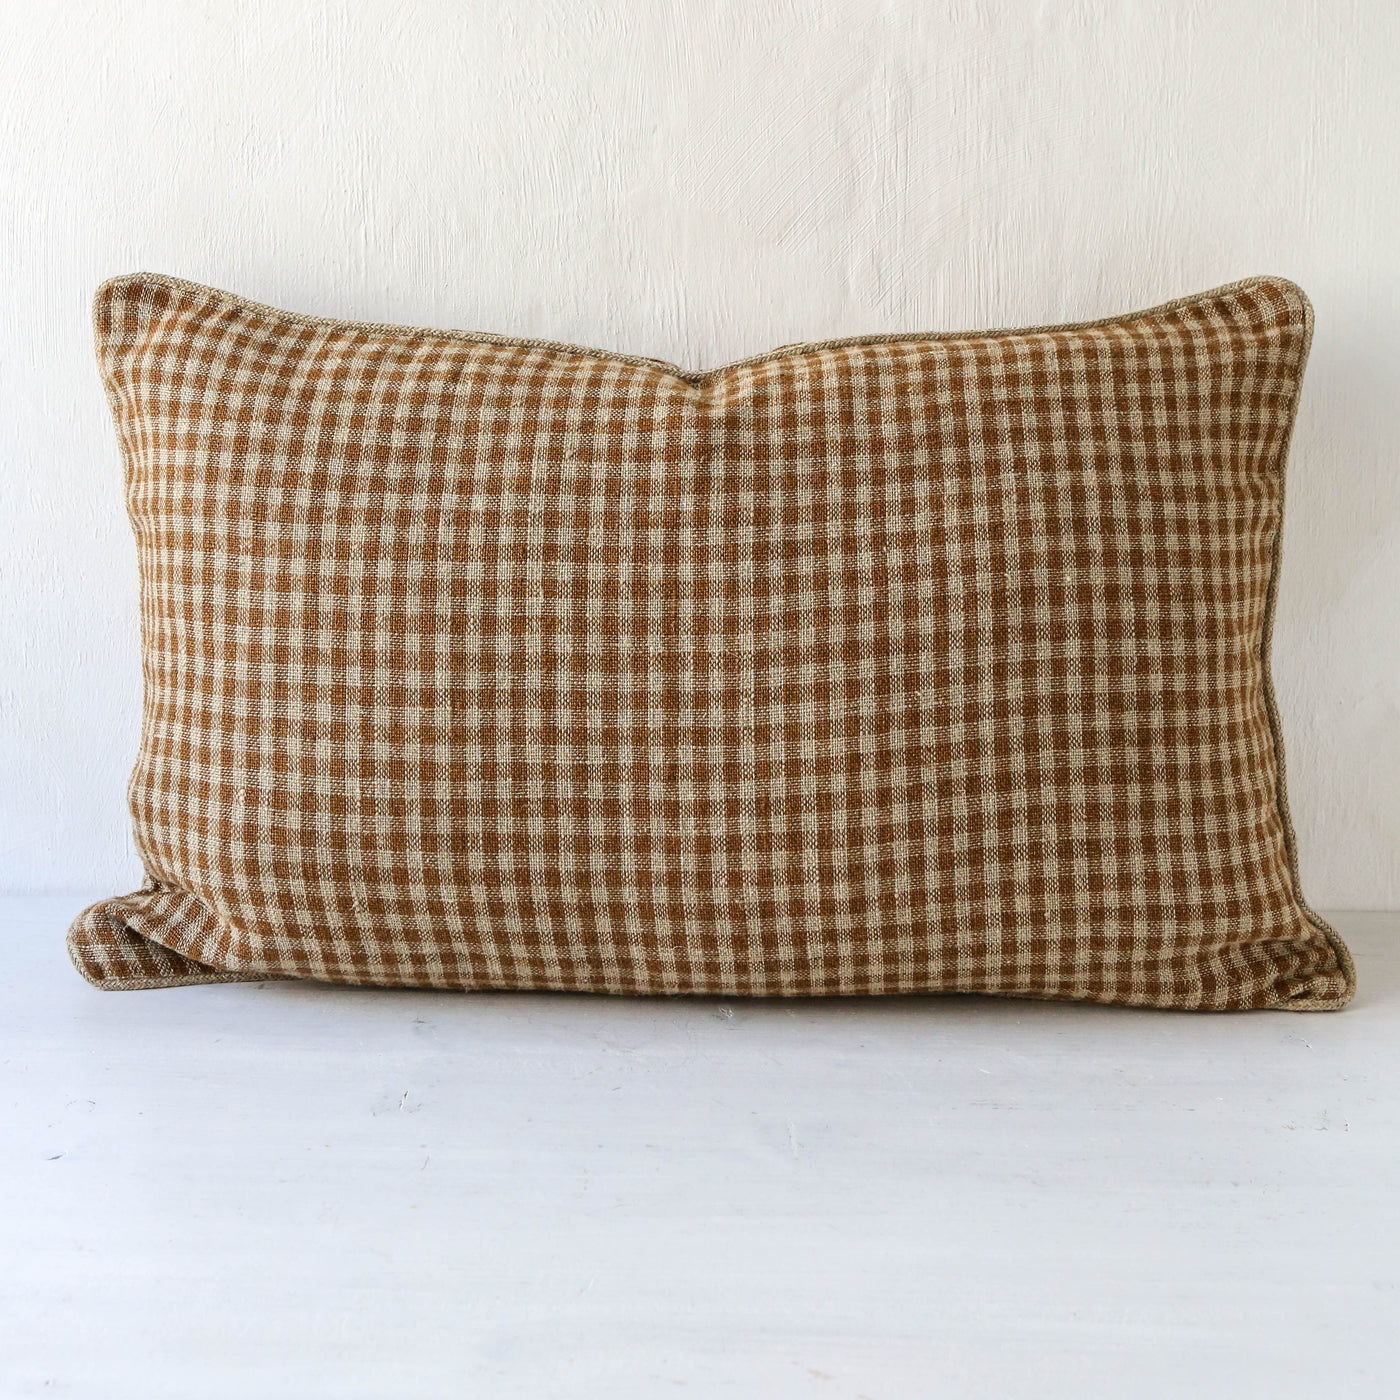 Oblong Piped Linen Cushion Cover - Gold Check